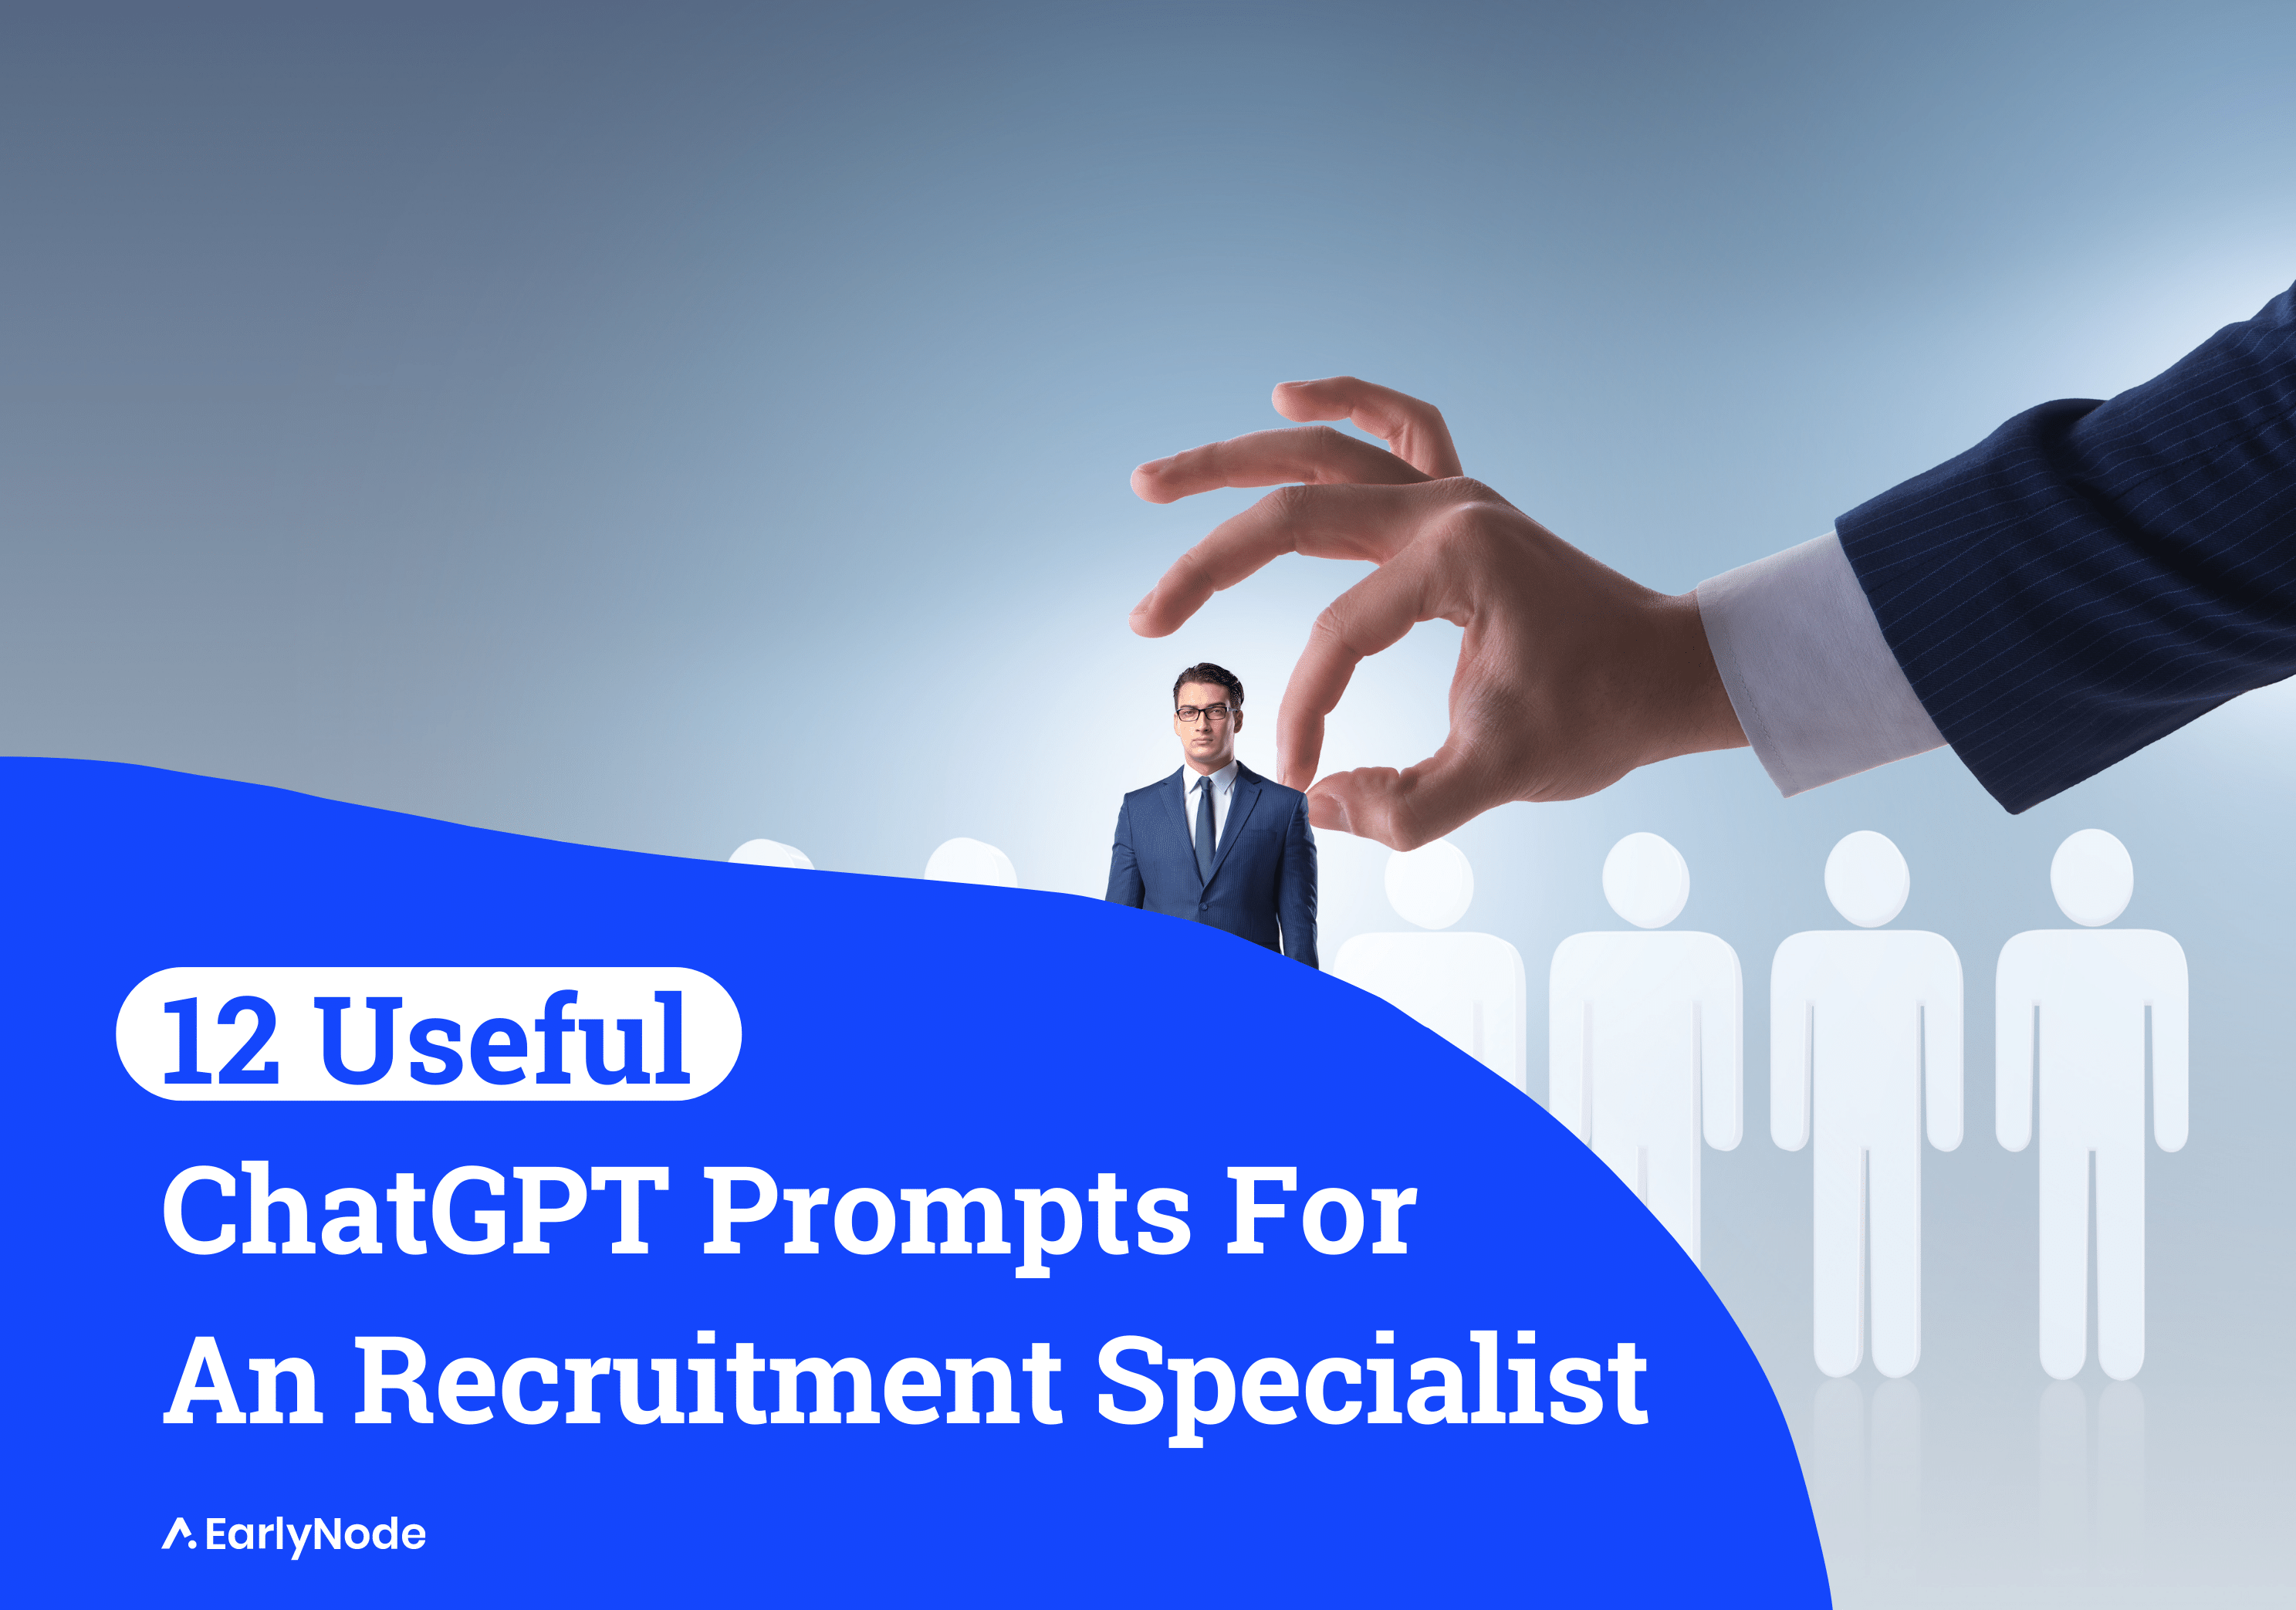 12 Useful ChatGPT Prompts For Recruitment Specialists